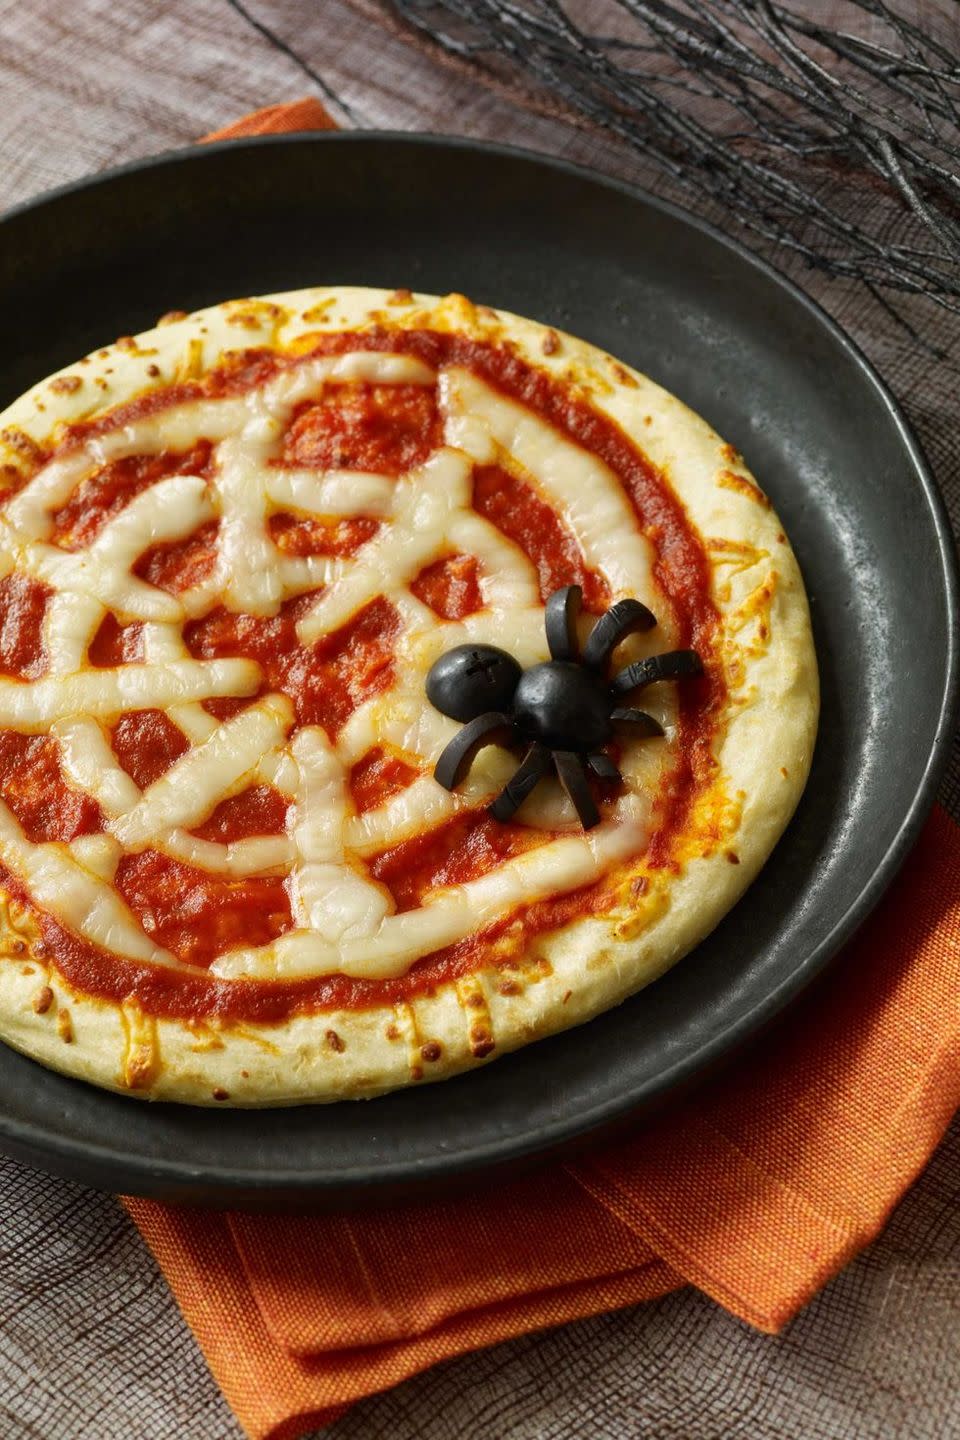 <p>Even if you only have a few minutes to prep some food for a Halloween get-together, these spiderweb pizzas would be more than doable. You could even use pitas to make lots of individual mini spider web pizzas, too.</p><p>Get the <strong><a href="https://www.womansday.com/food-recipes/food-drinks/recipes/a10838/spiderweb-pizzas-recipe-122166/" rel="nofollow noopener" target="_blank" data-ylk="slk:Spiderweb Pizza recipe" class="link ">Spiderweb Pizza recipe</a></strong>. </p>